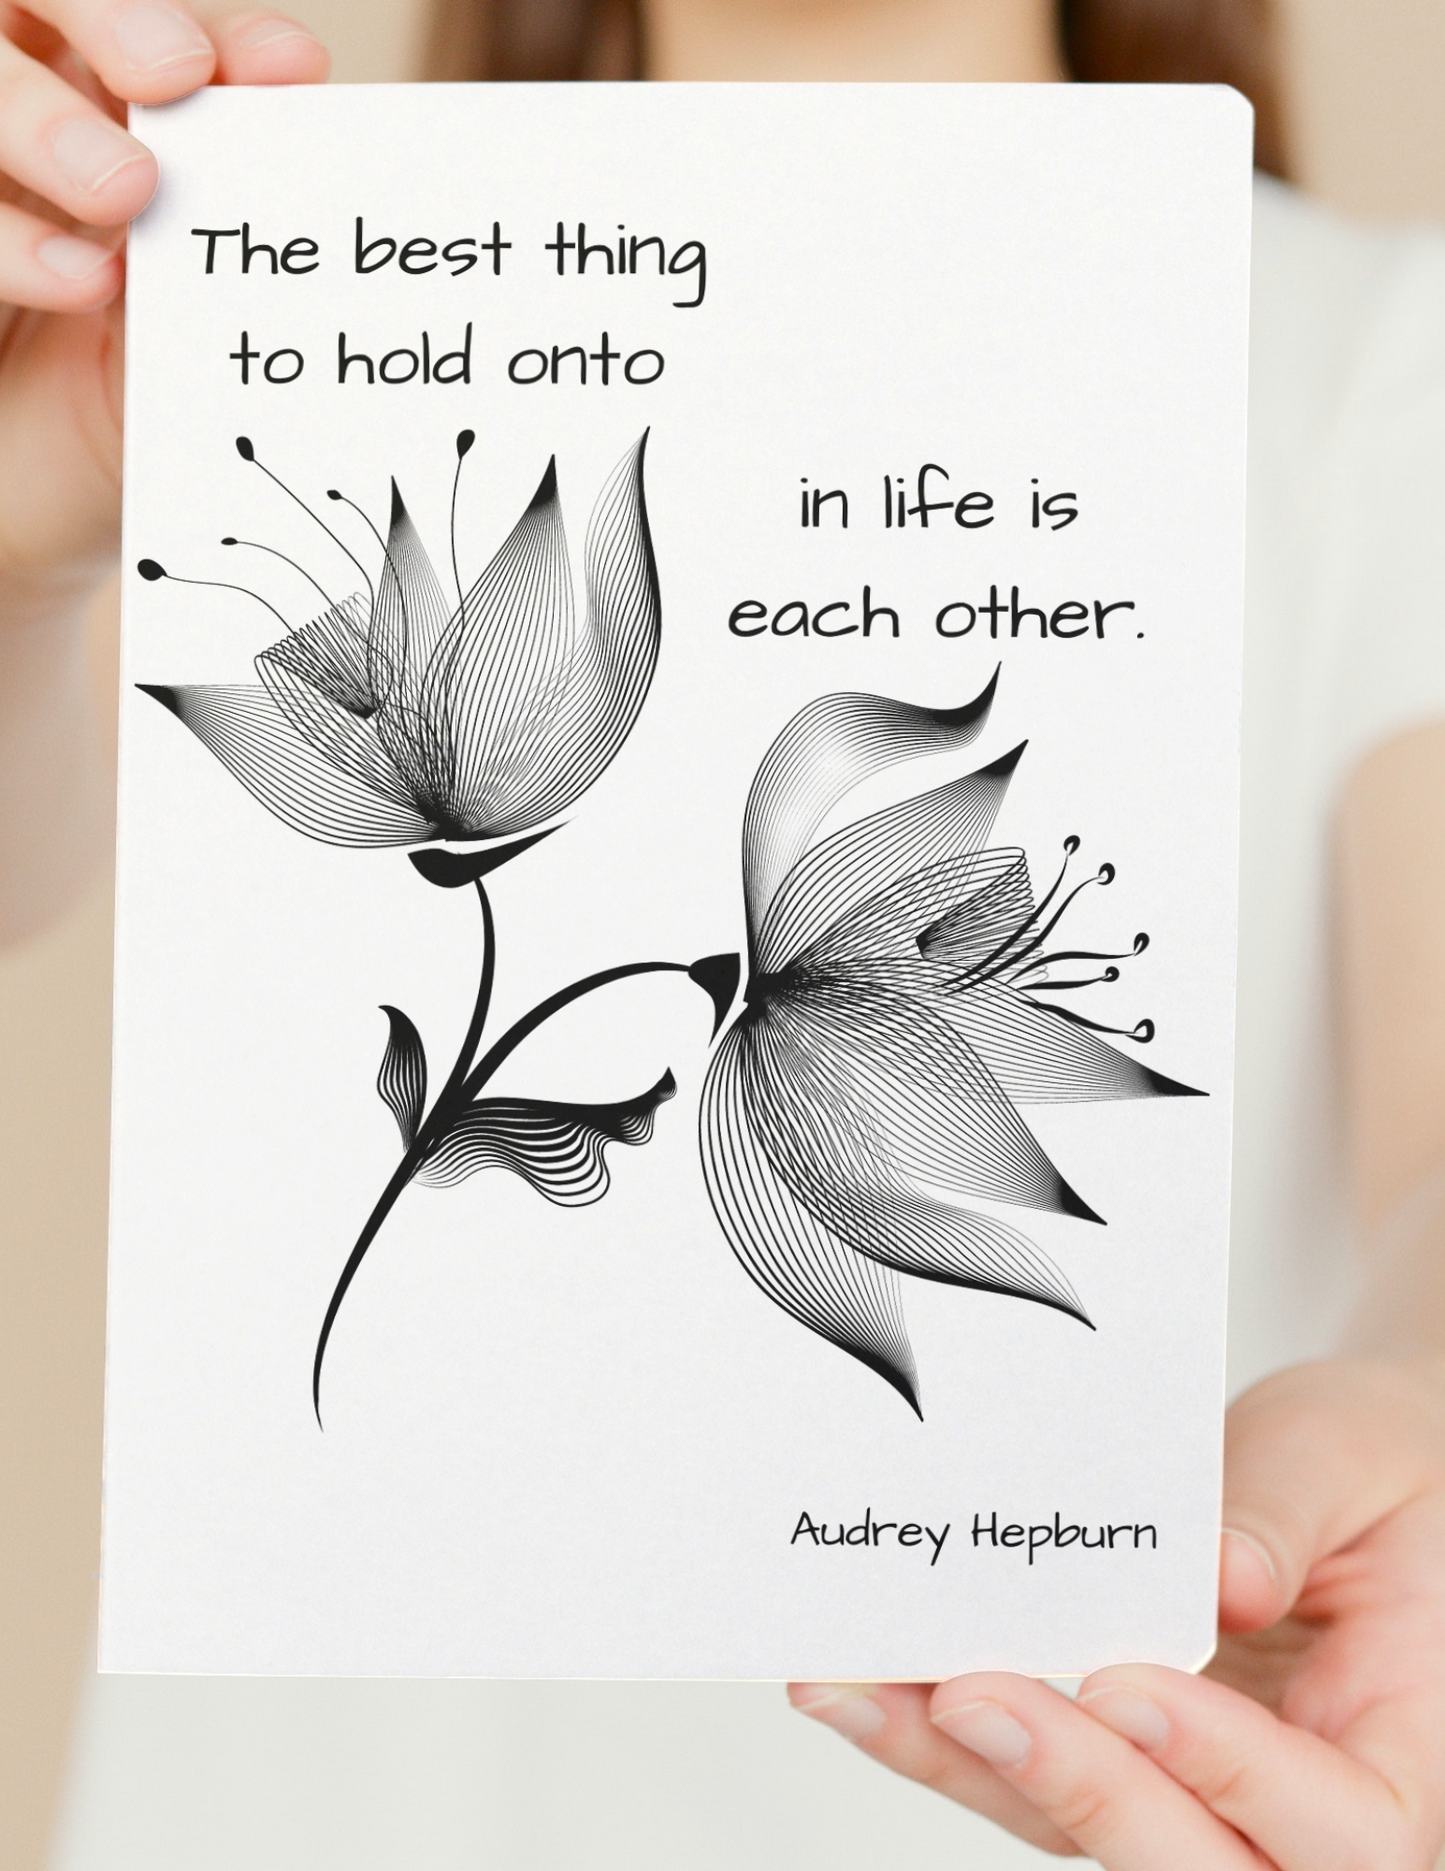 Audrey Hepburn quote - Physical Print Wall Art